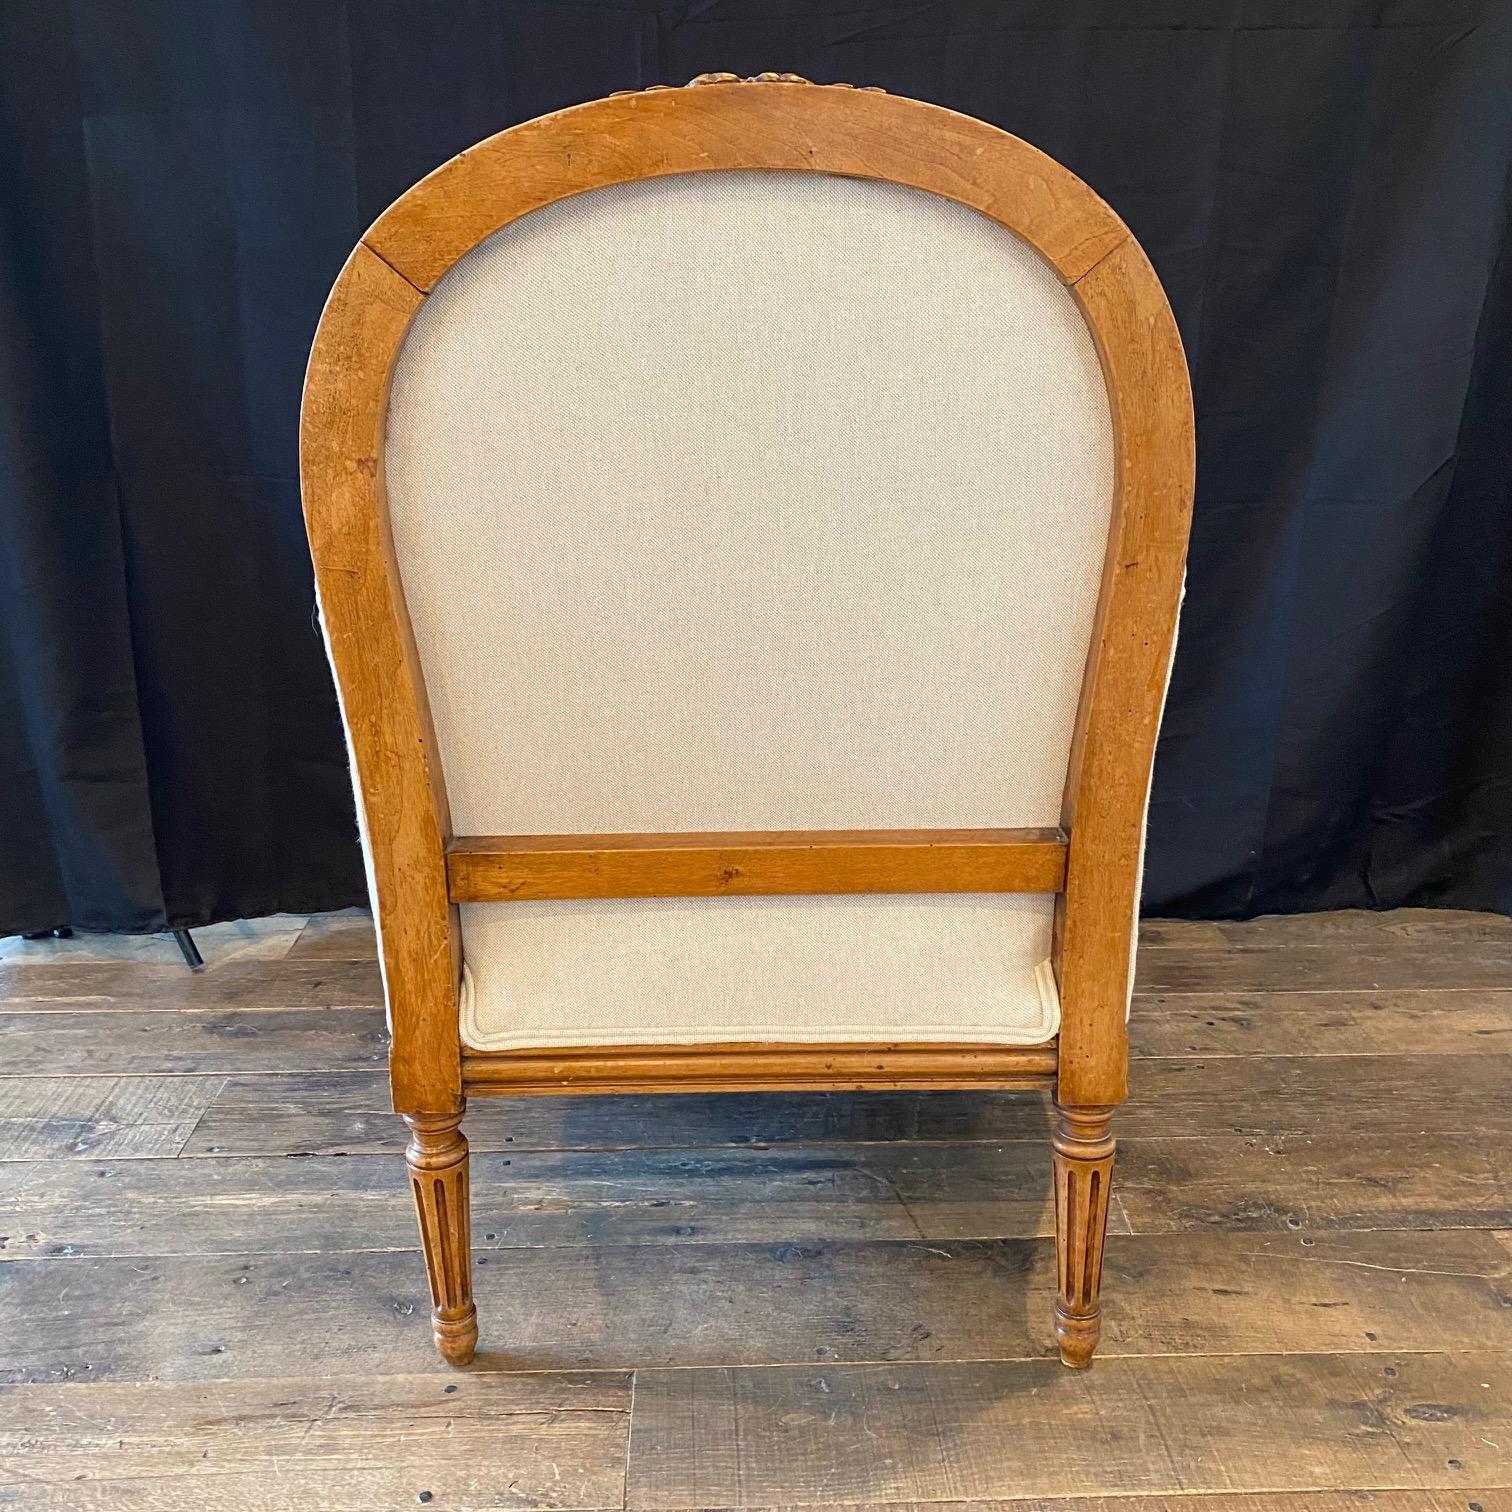 A pair of timeless and elegant French Louis XVI armchairs from the 19th century having a shapely, upholstered back, with  arched crest rail, all framed within molded wood trim. Carved wood arms, with manchette pads for comfort, terminate into